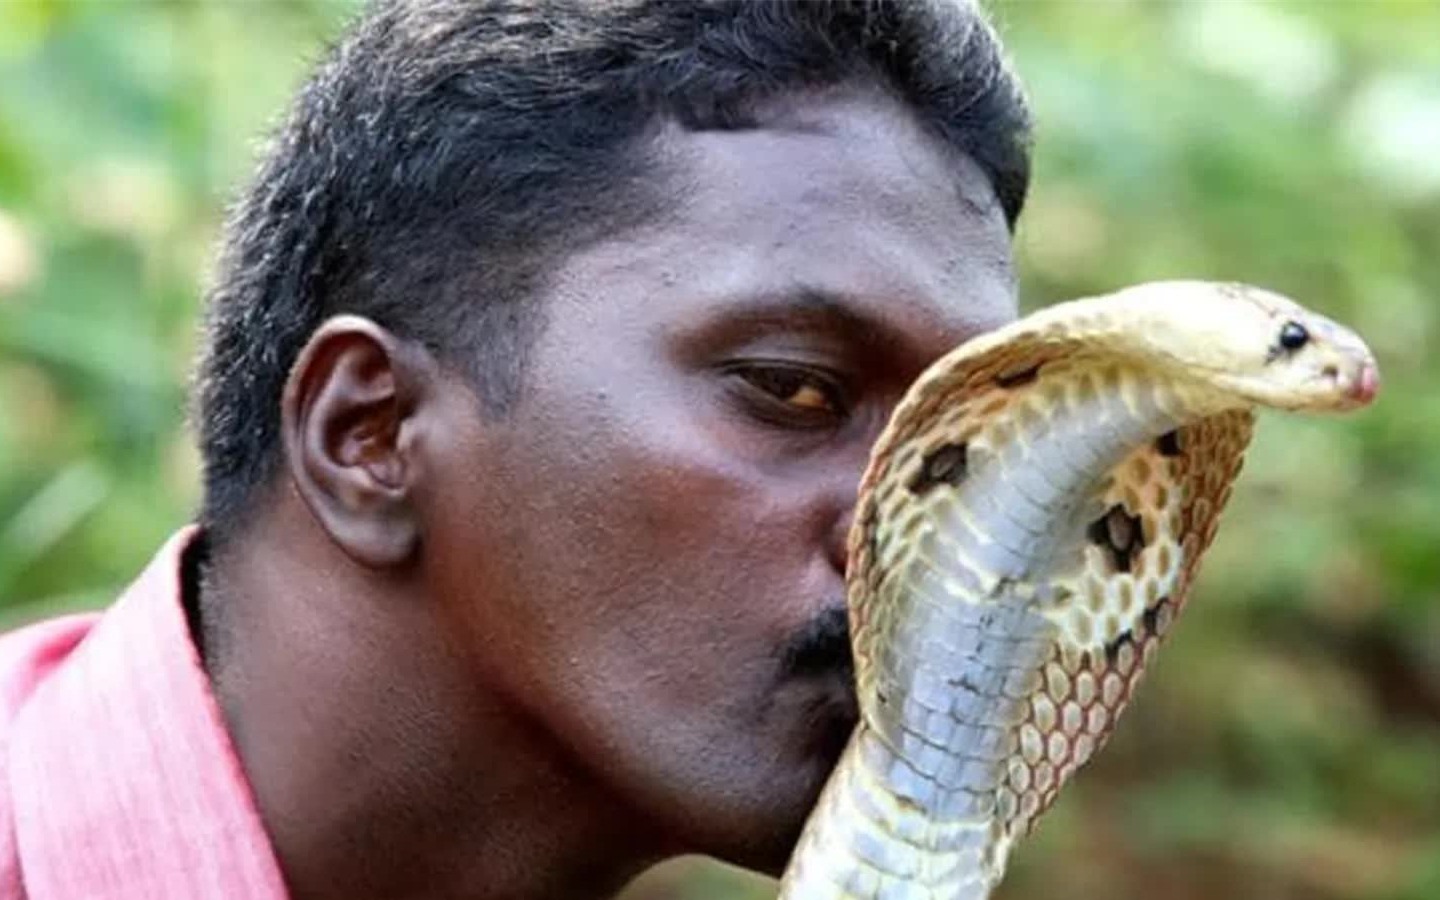 Why didn’t humans evolve to possess venom like snakes?